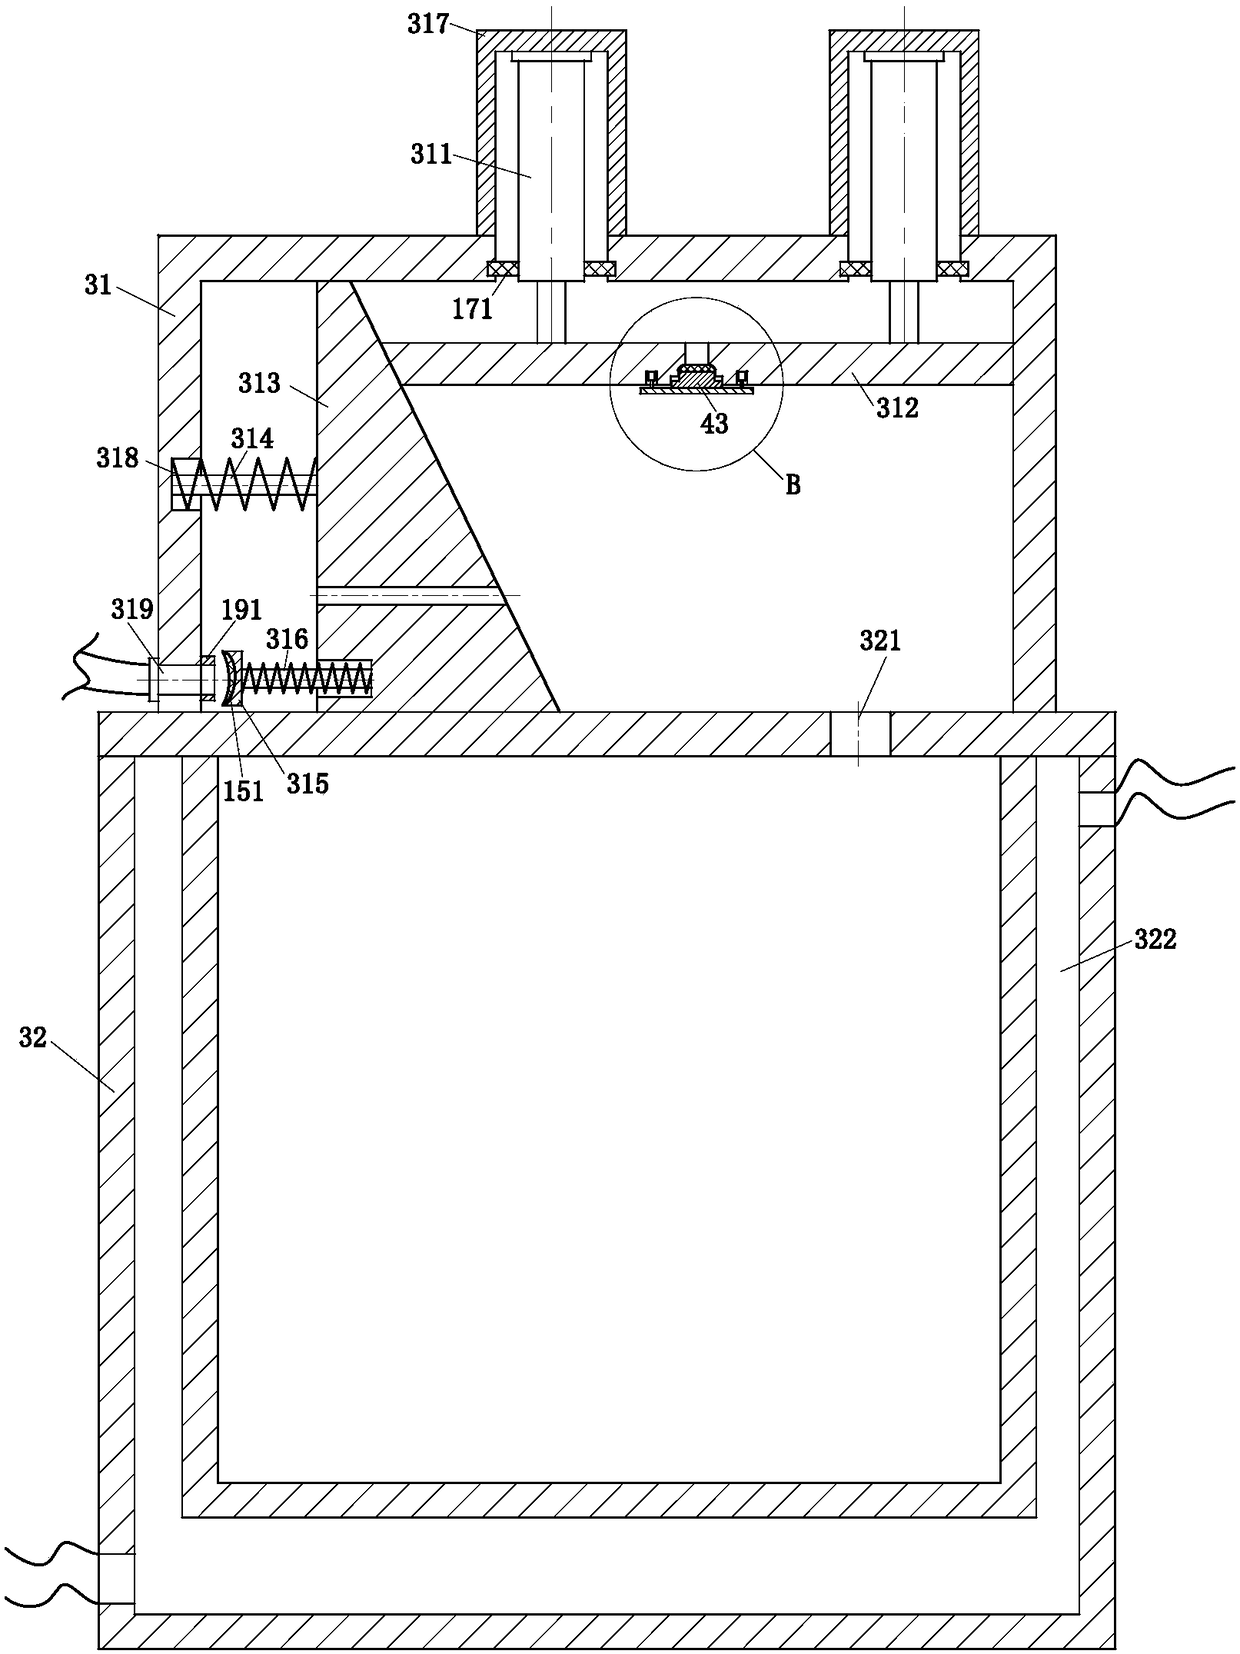 Liquid alcohol extracting and collecting system